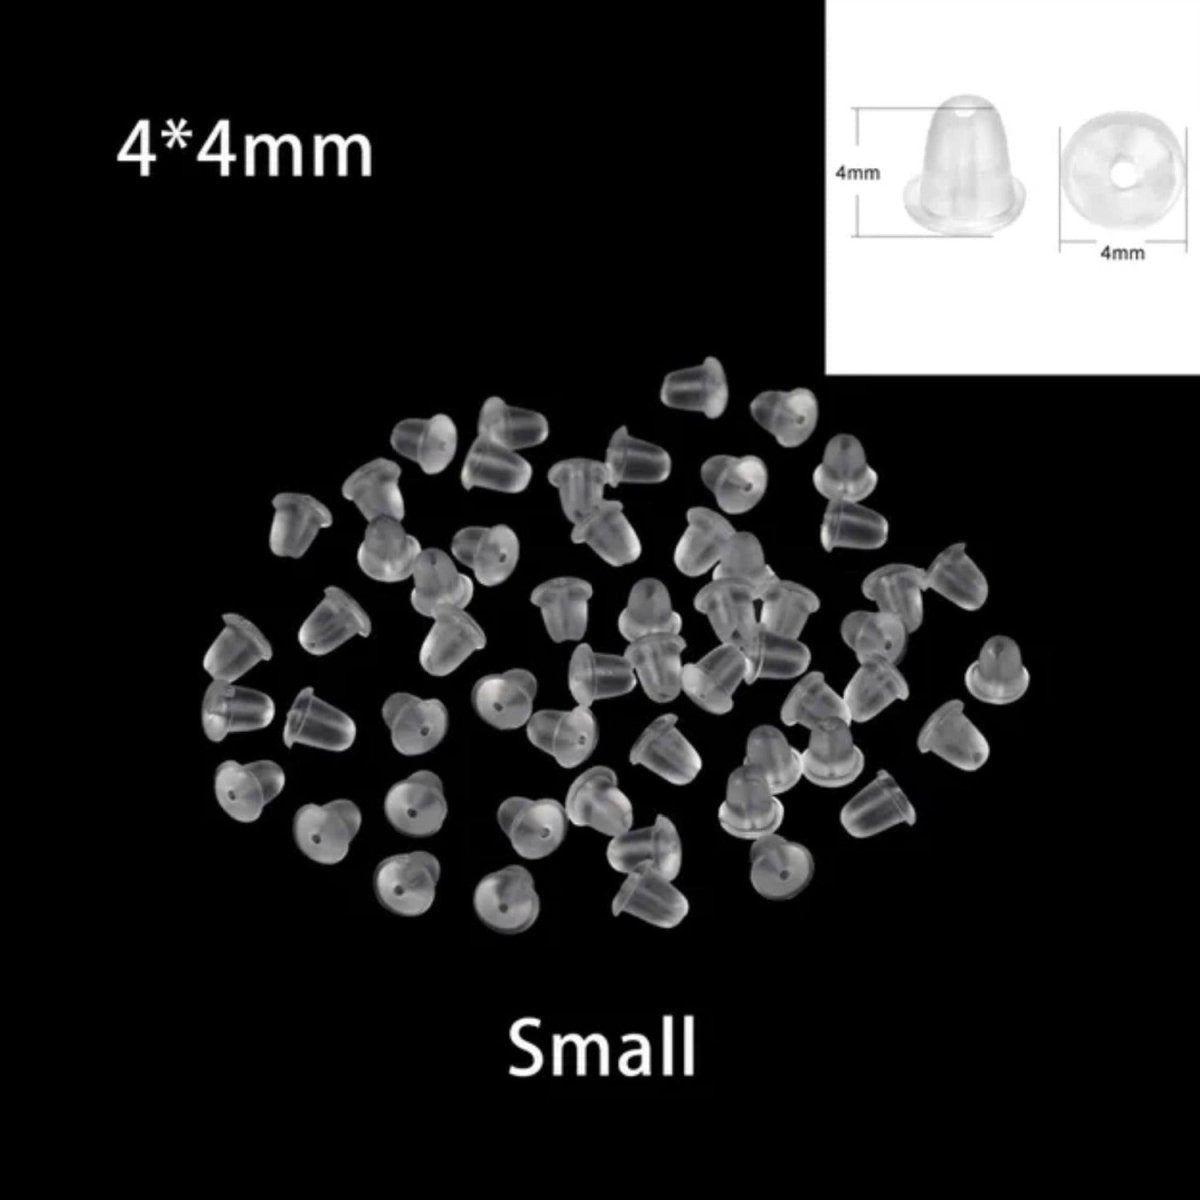 2000pcs Soft Silicone Rubber Earring Back Stoppers for Stud Earrings DIY Earring Findings Accessories Bullet Tube Ear Plugs - Small 4x4mm - - Asia Sell